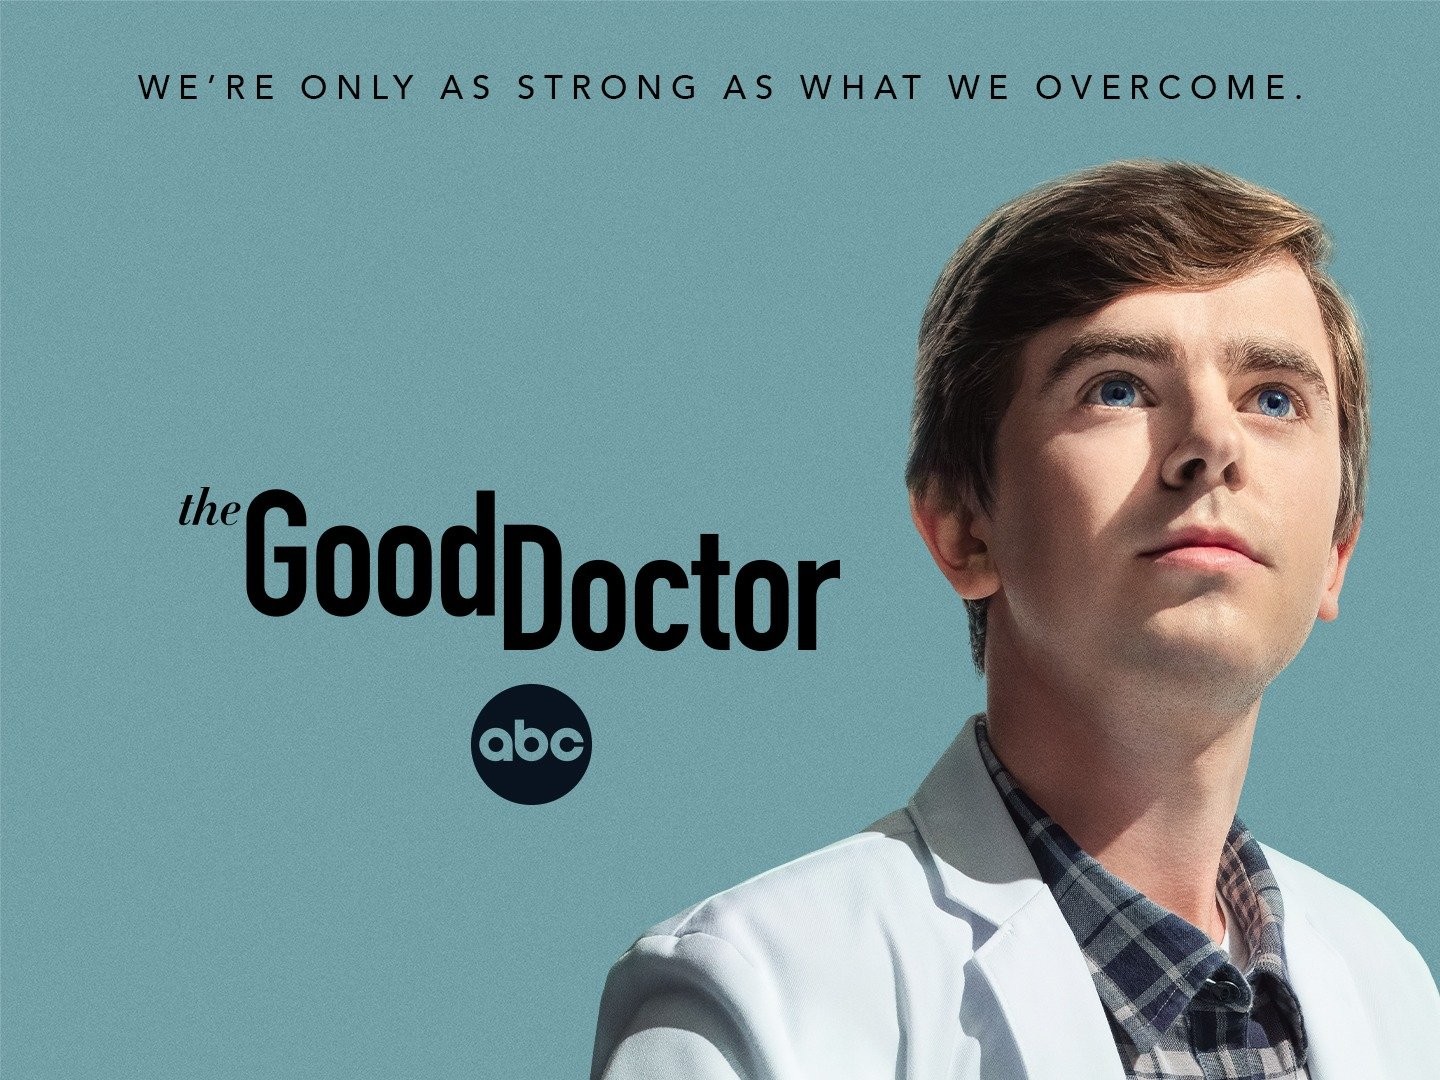 Pin by Tamara Ailén on ㅤ／﹕the good doctor., | Good doctor, The good doctor  abc, Freddie highmore